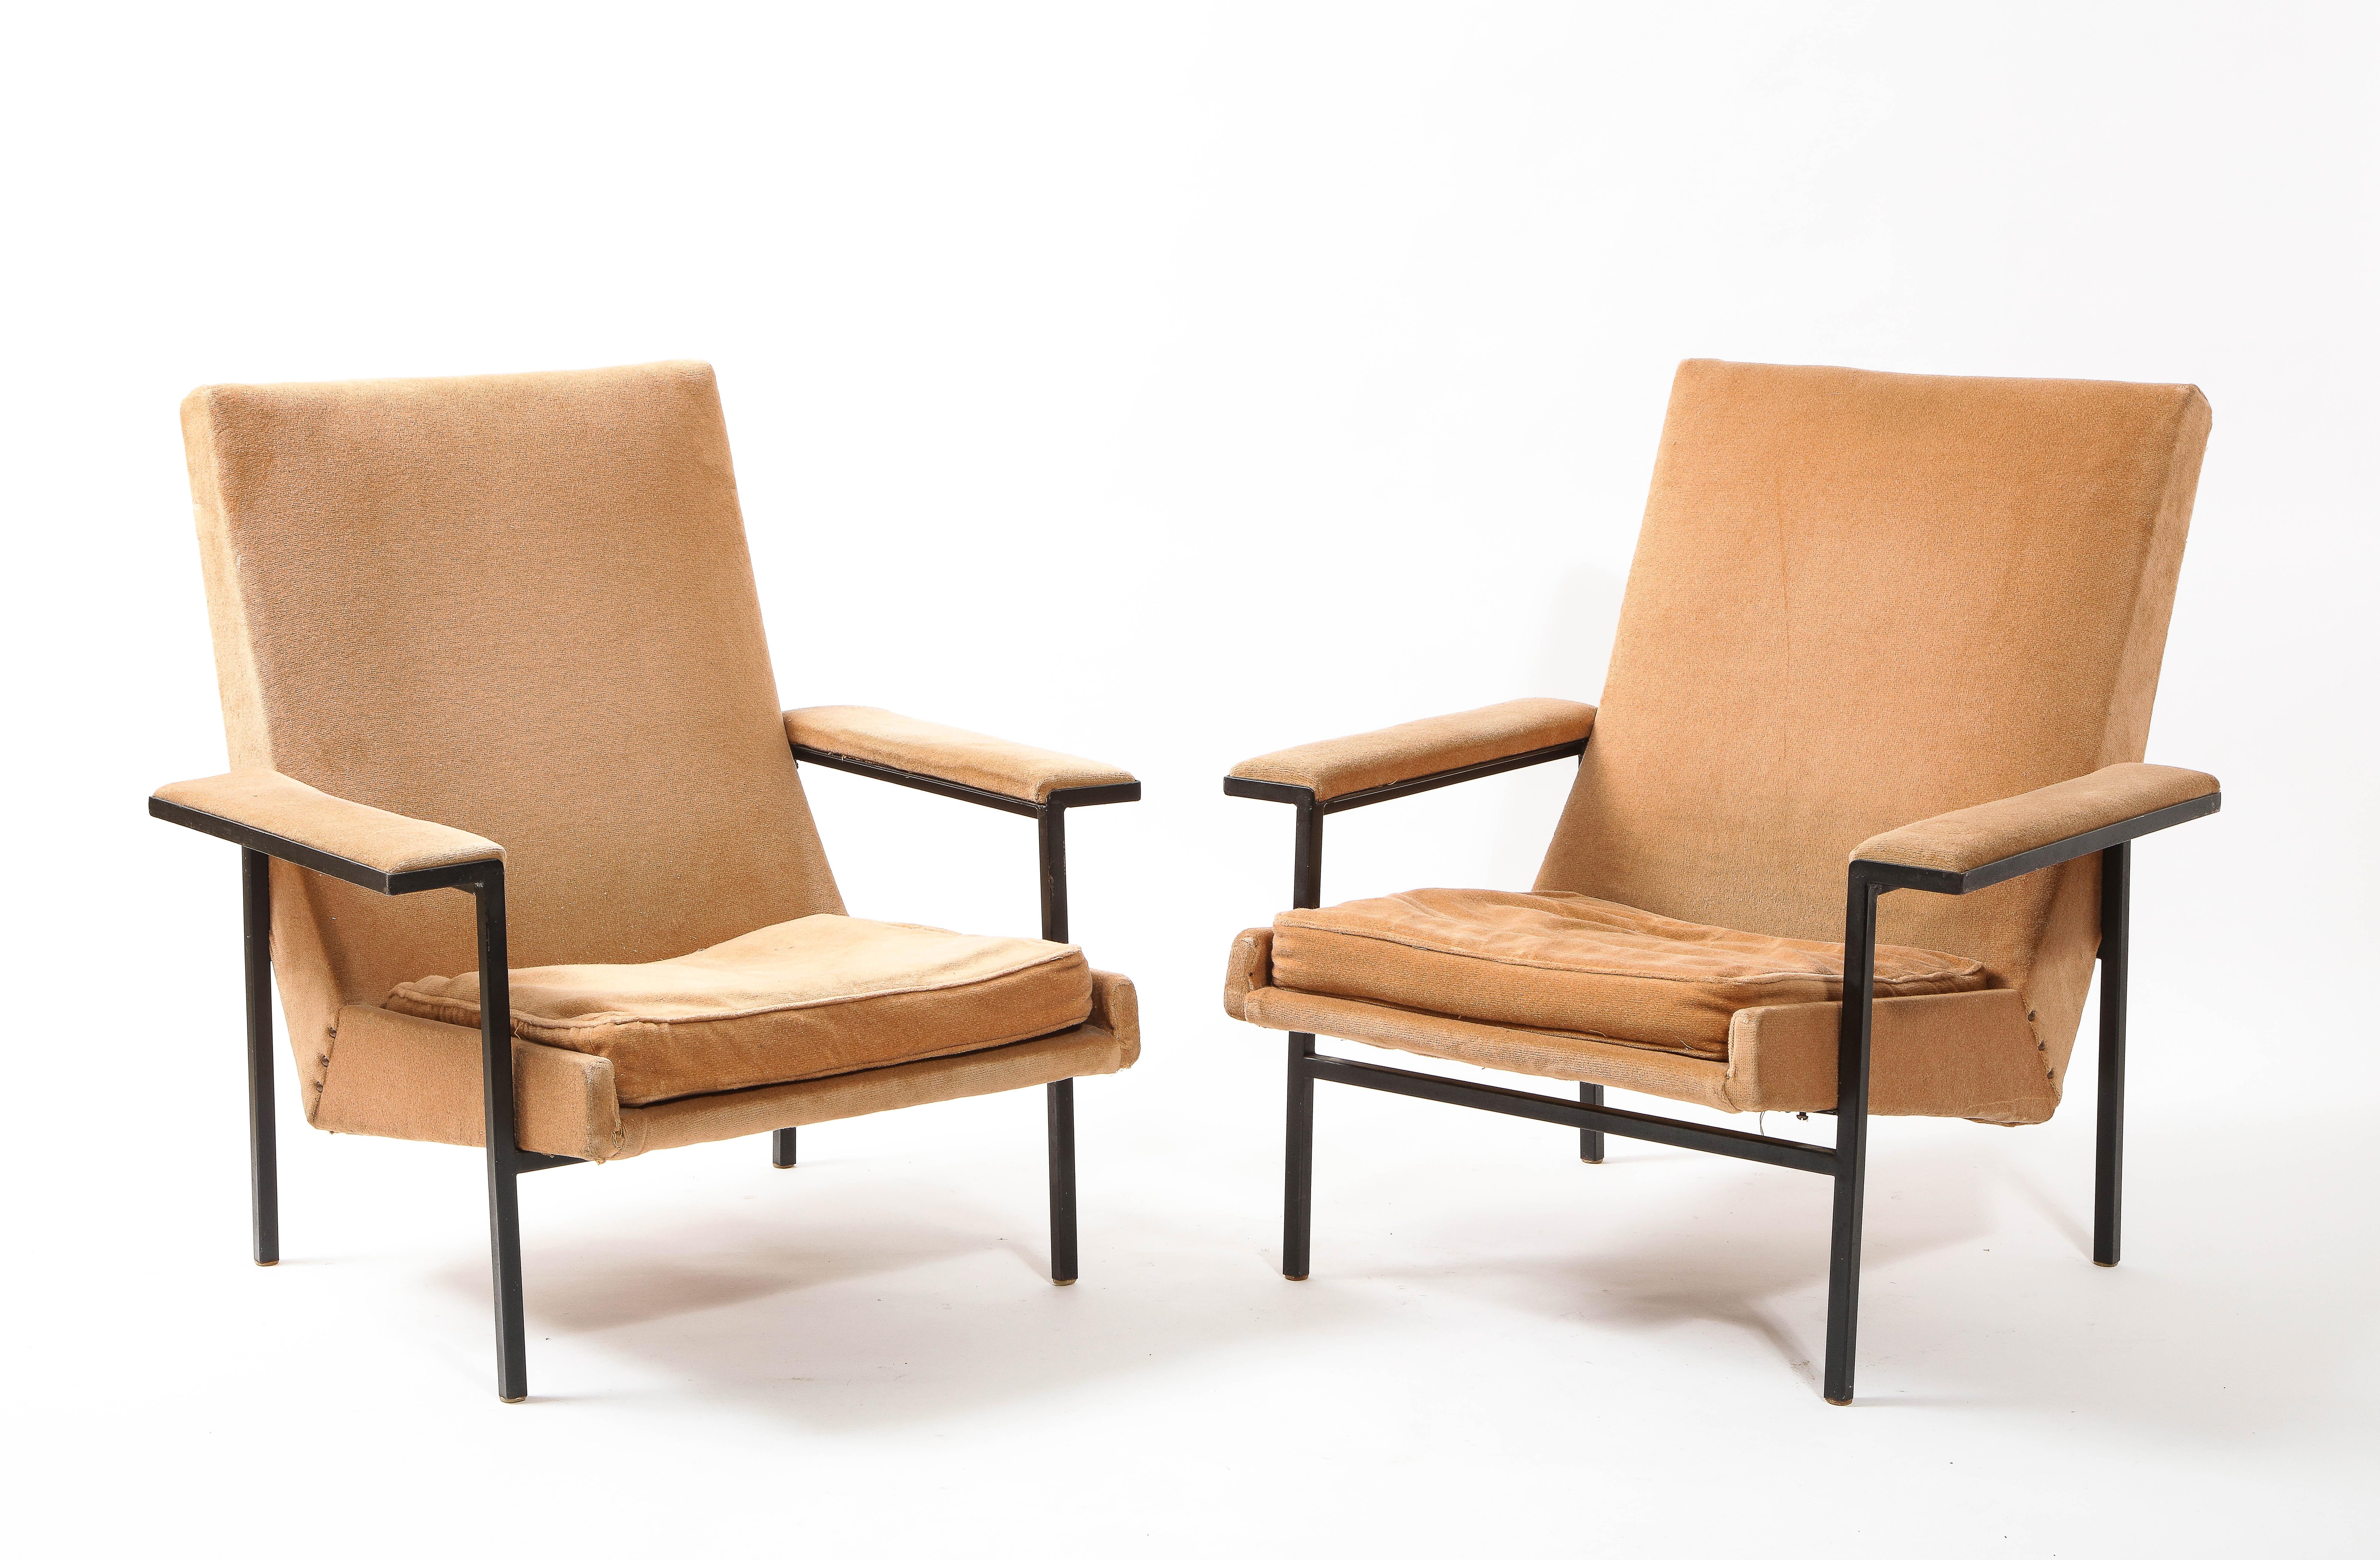 A rare pair of armchairs designed by studio A.R.P founded in 1950 by Pierre Guariche alongside Motte and Mortier. A lacquered steel base made of square tubing support an upholstered seat found on other iterations of this chair. In it's original